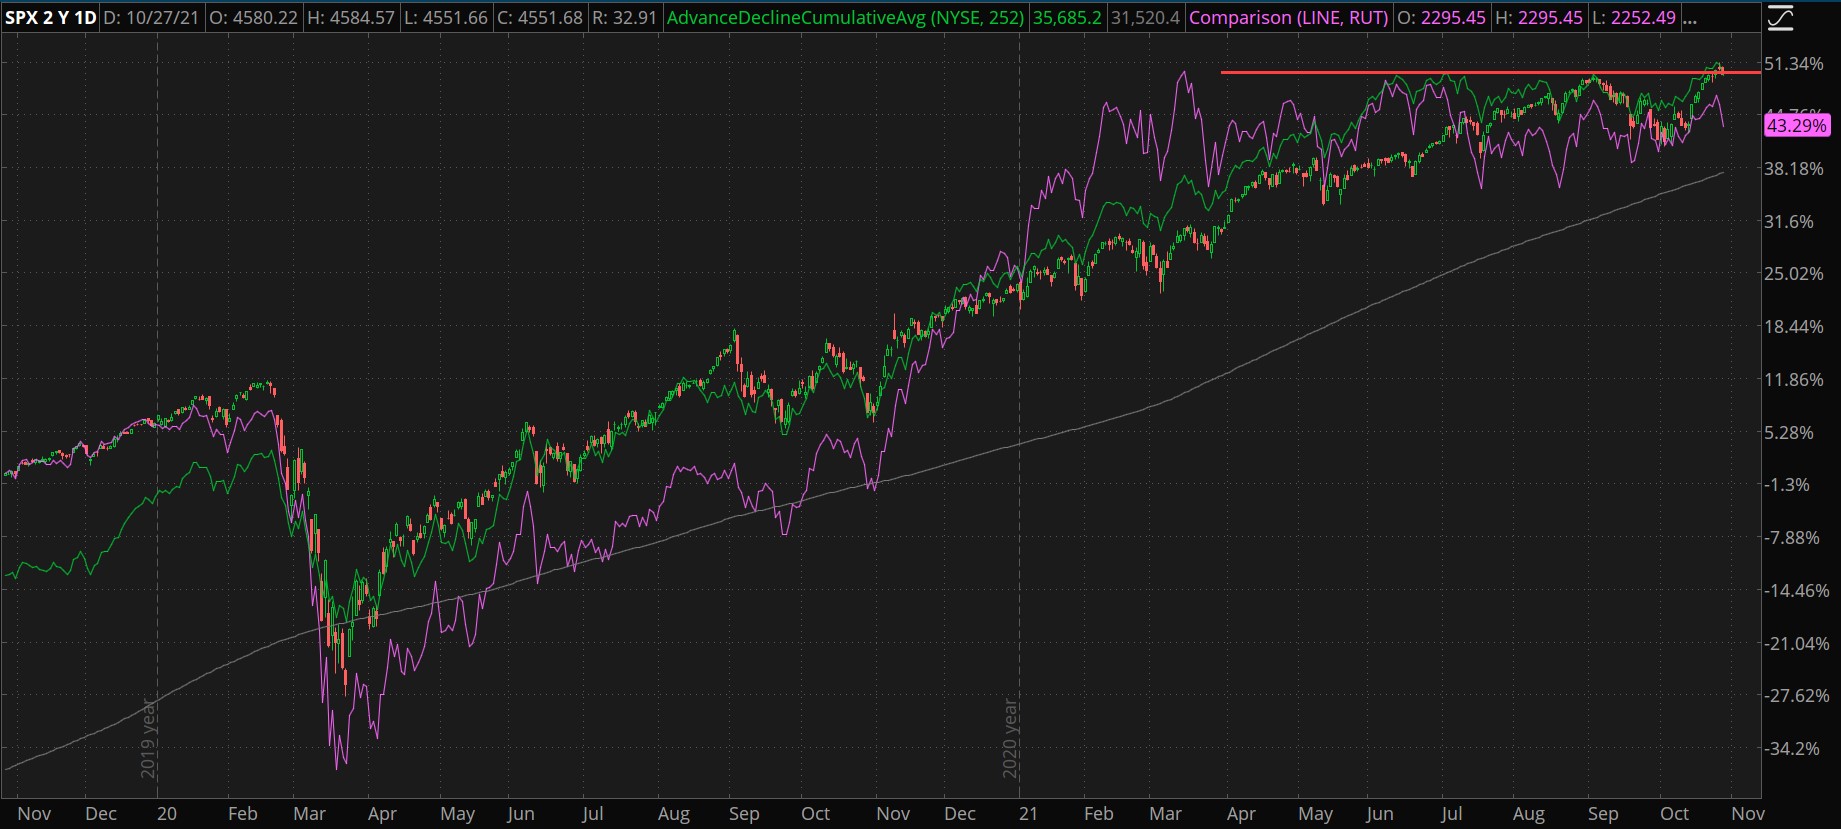 S&P 500 And Russell 2000 Combined Chart.